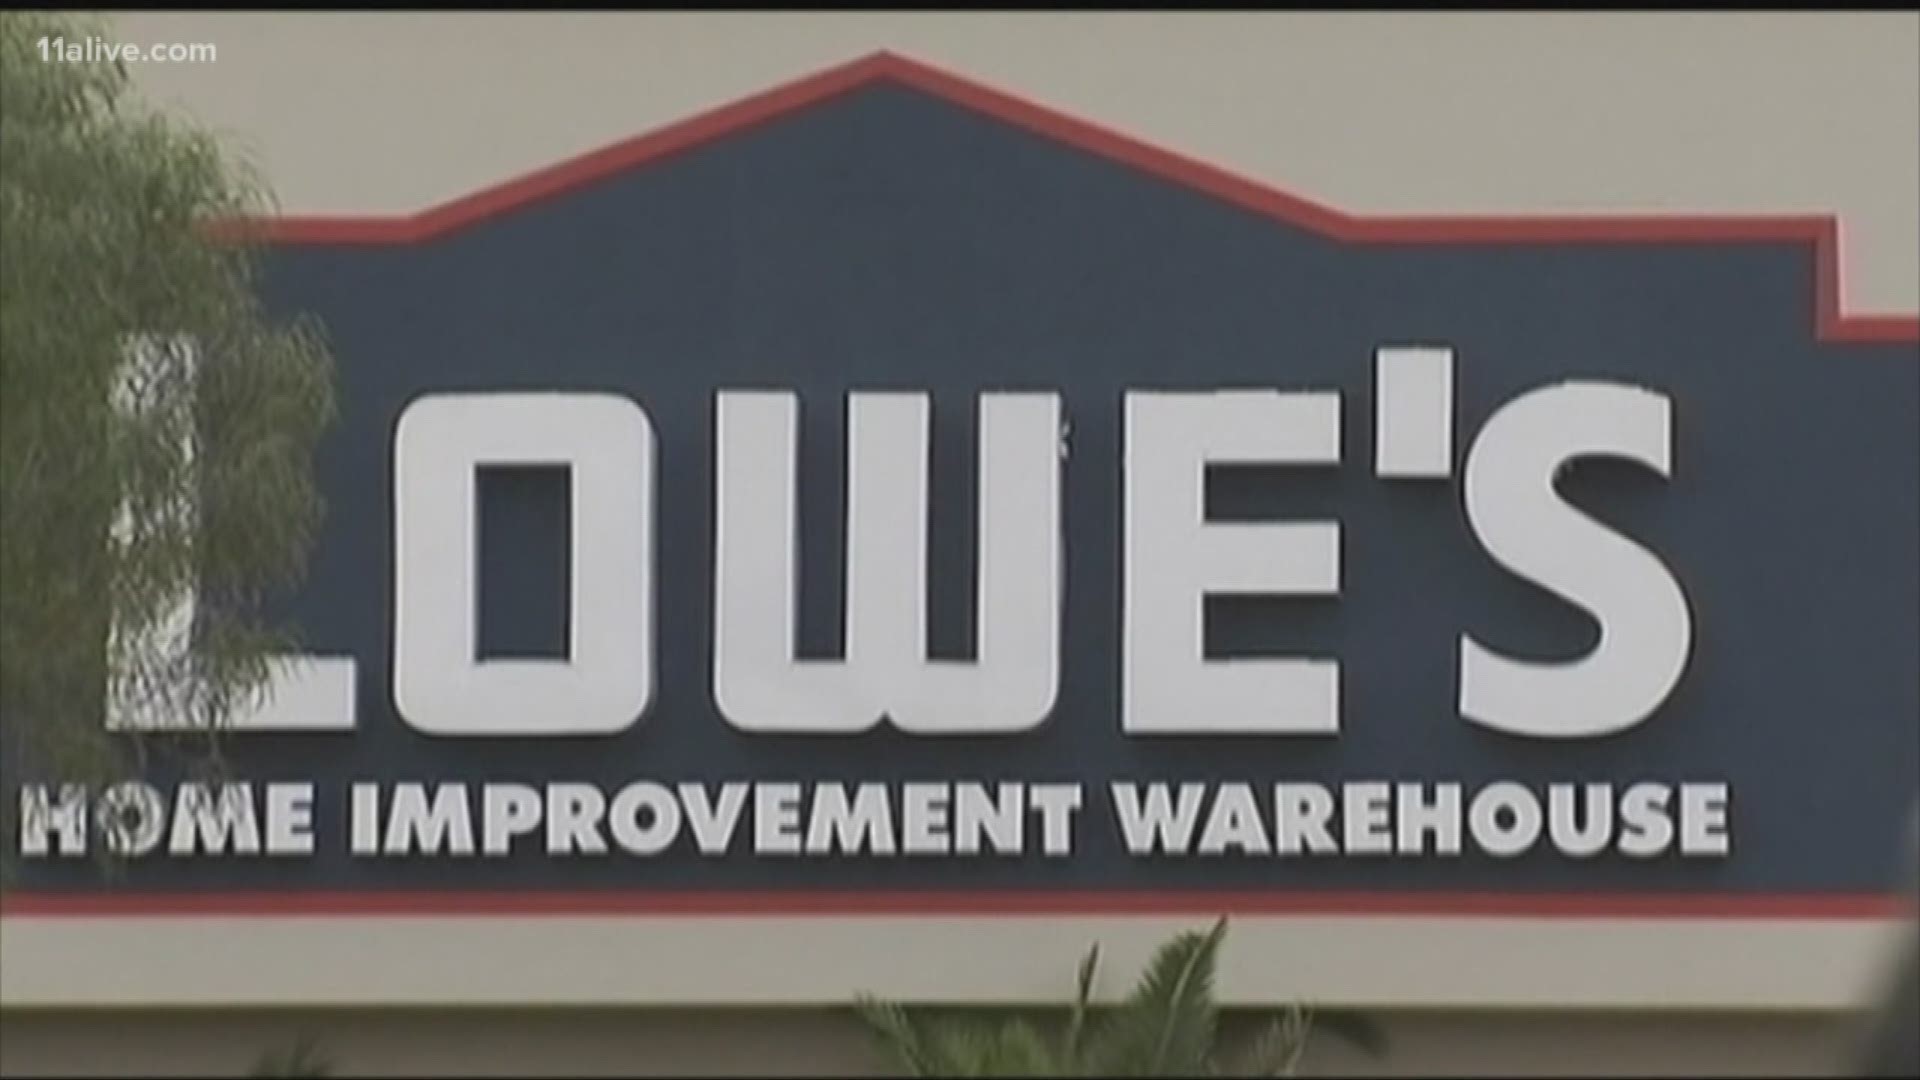 Lowe's plans to hire 65,000 seasonal and permanent employees this year, including the first 500 of a planned 2,000 IT employees, the Atlanta Business Chronicle reported.